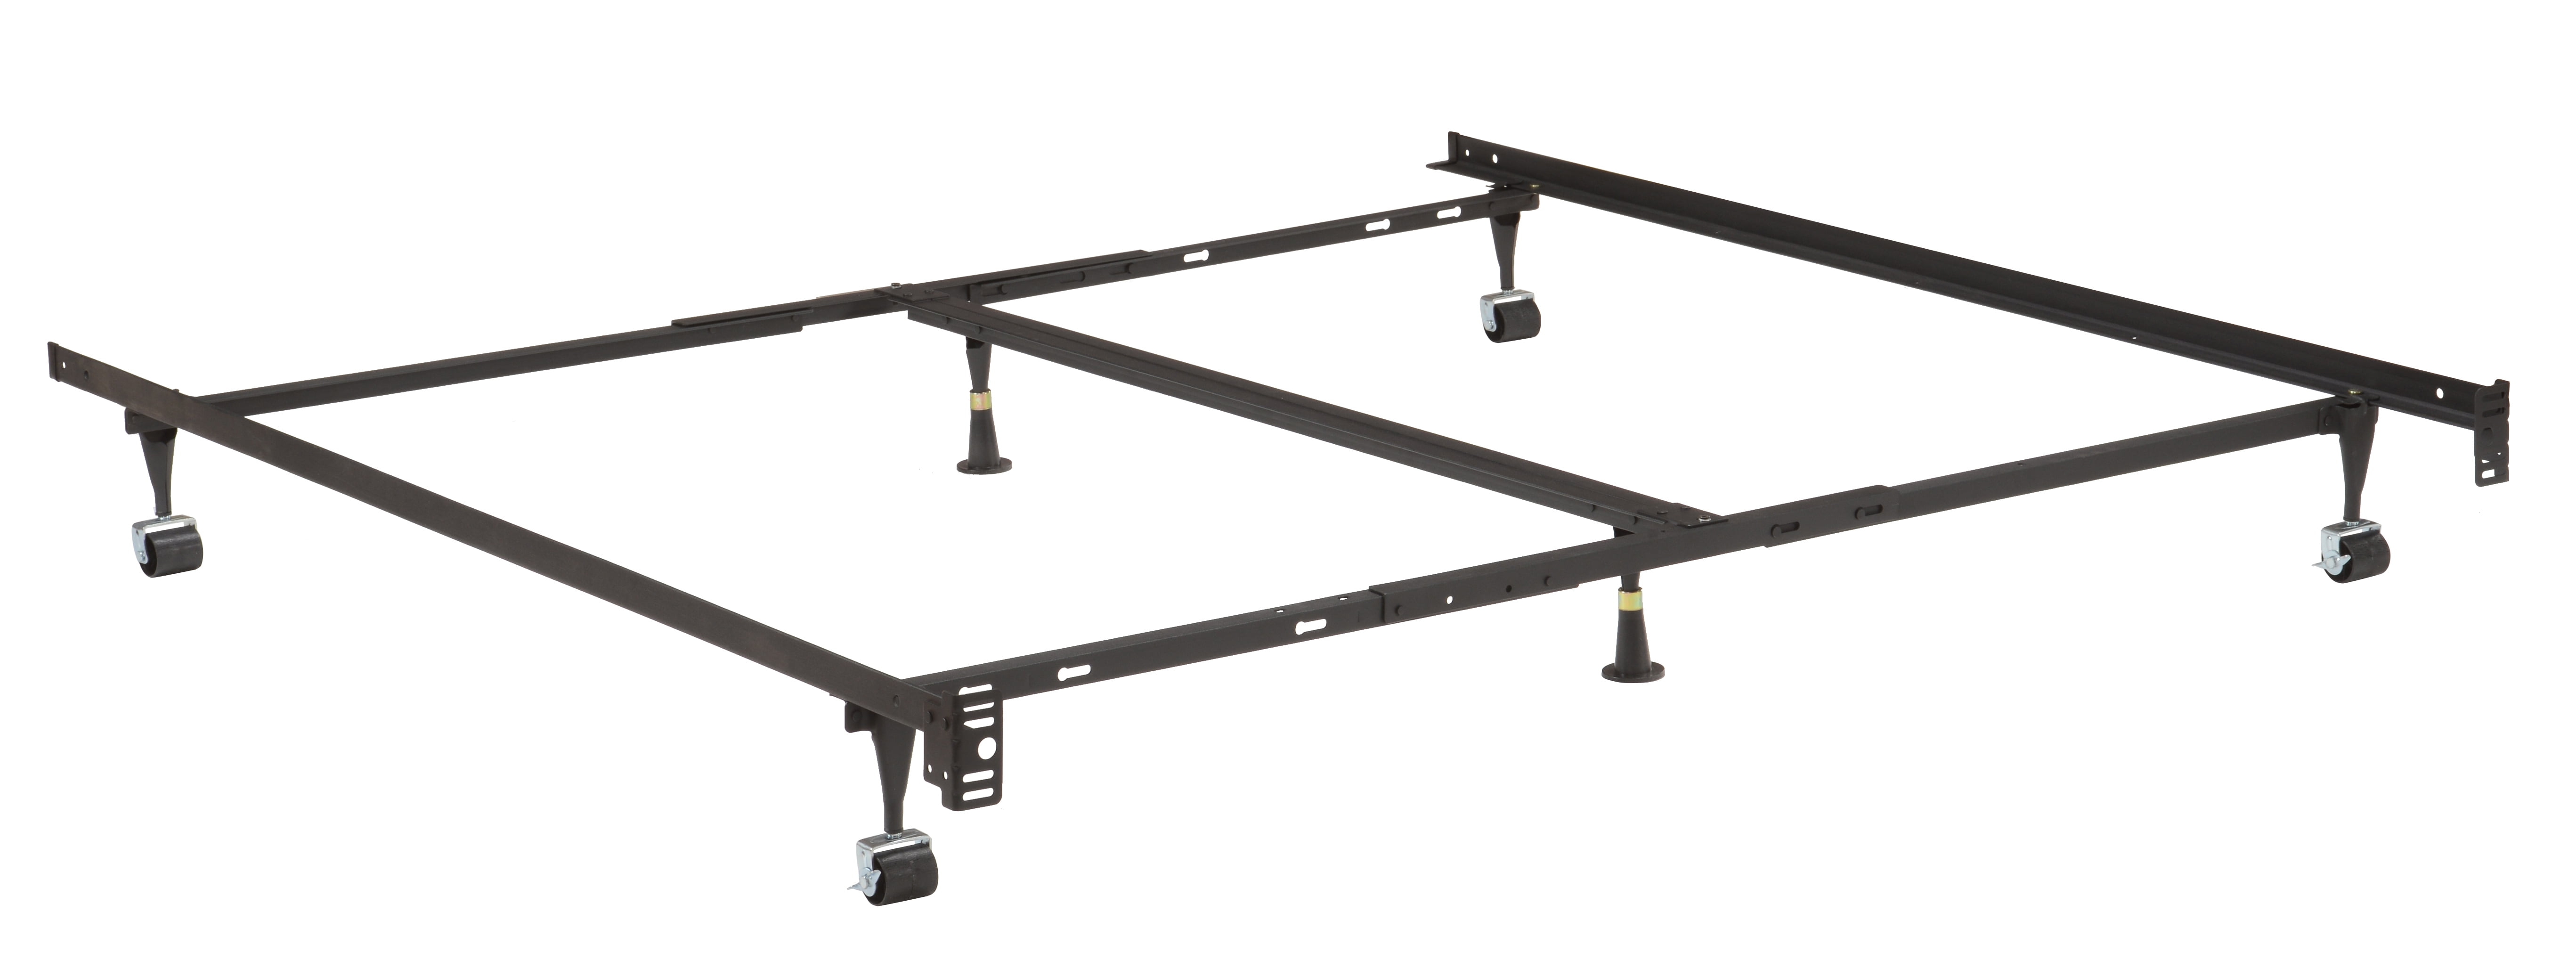 Heavy Duty Steel Bed Frame Adjustable Queen Full Twin Size W/ Center Support US 